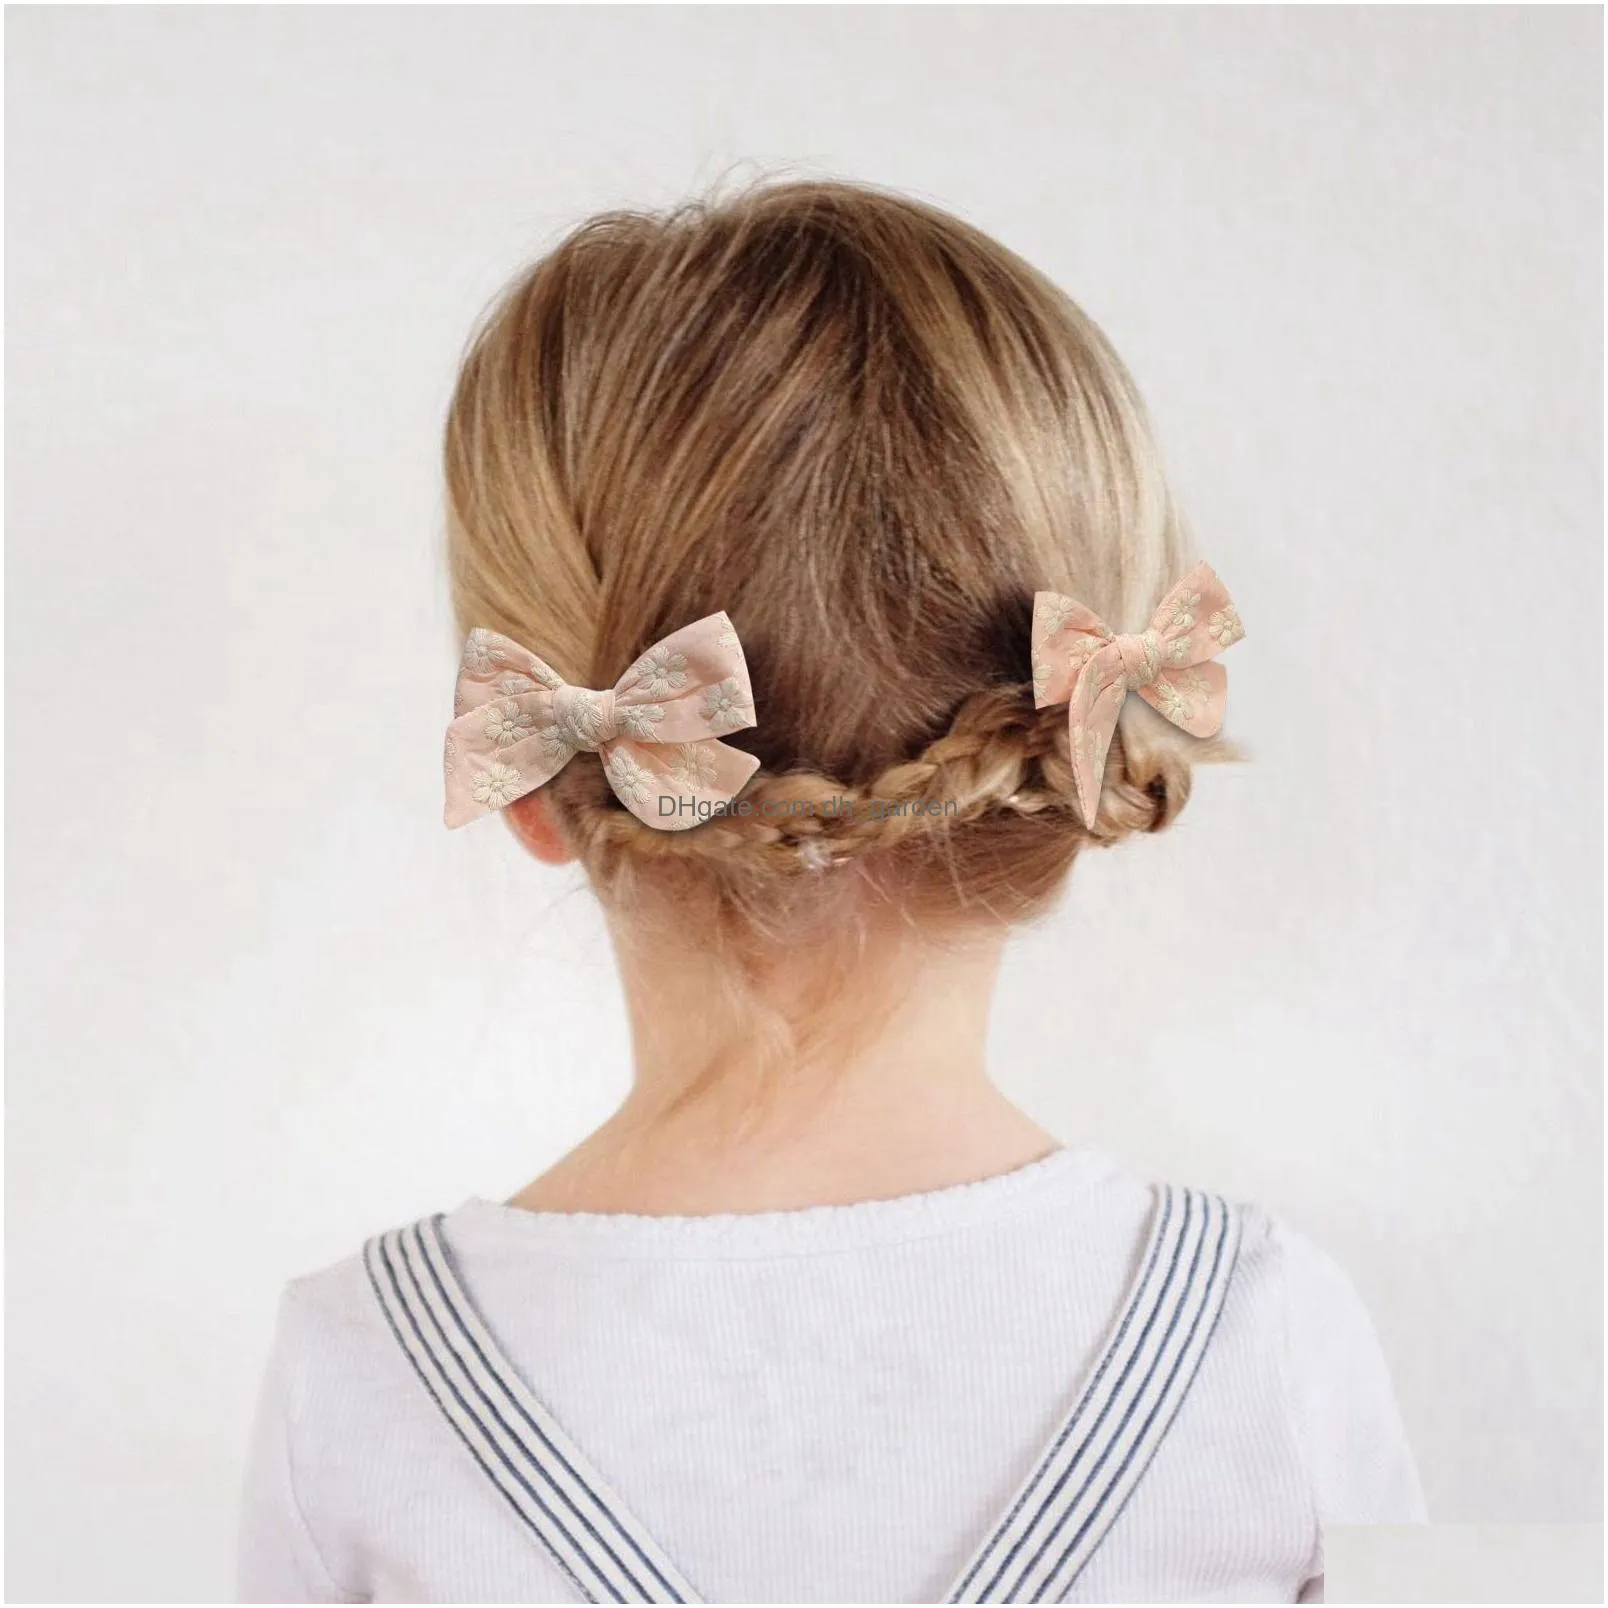 Hair Clips & Barrettes 4Pcs/Set Sweet Print Bowknot Hair Clips For Cute Baby Girls Cotton Bows Hairpin Barrette New Headwear Dhgarden Otkd8